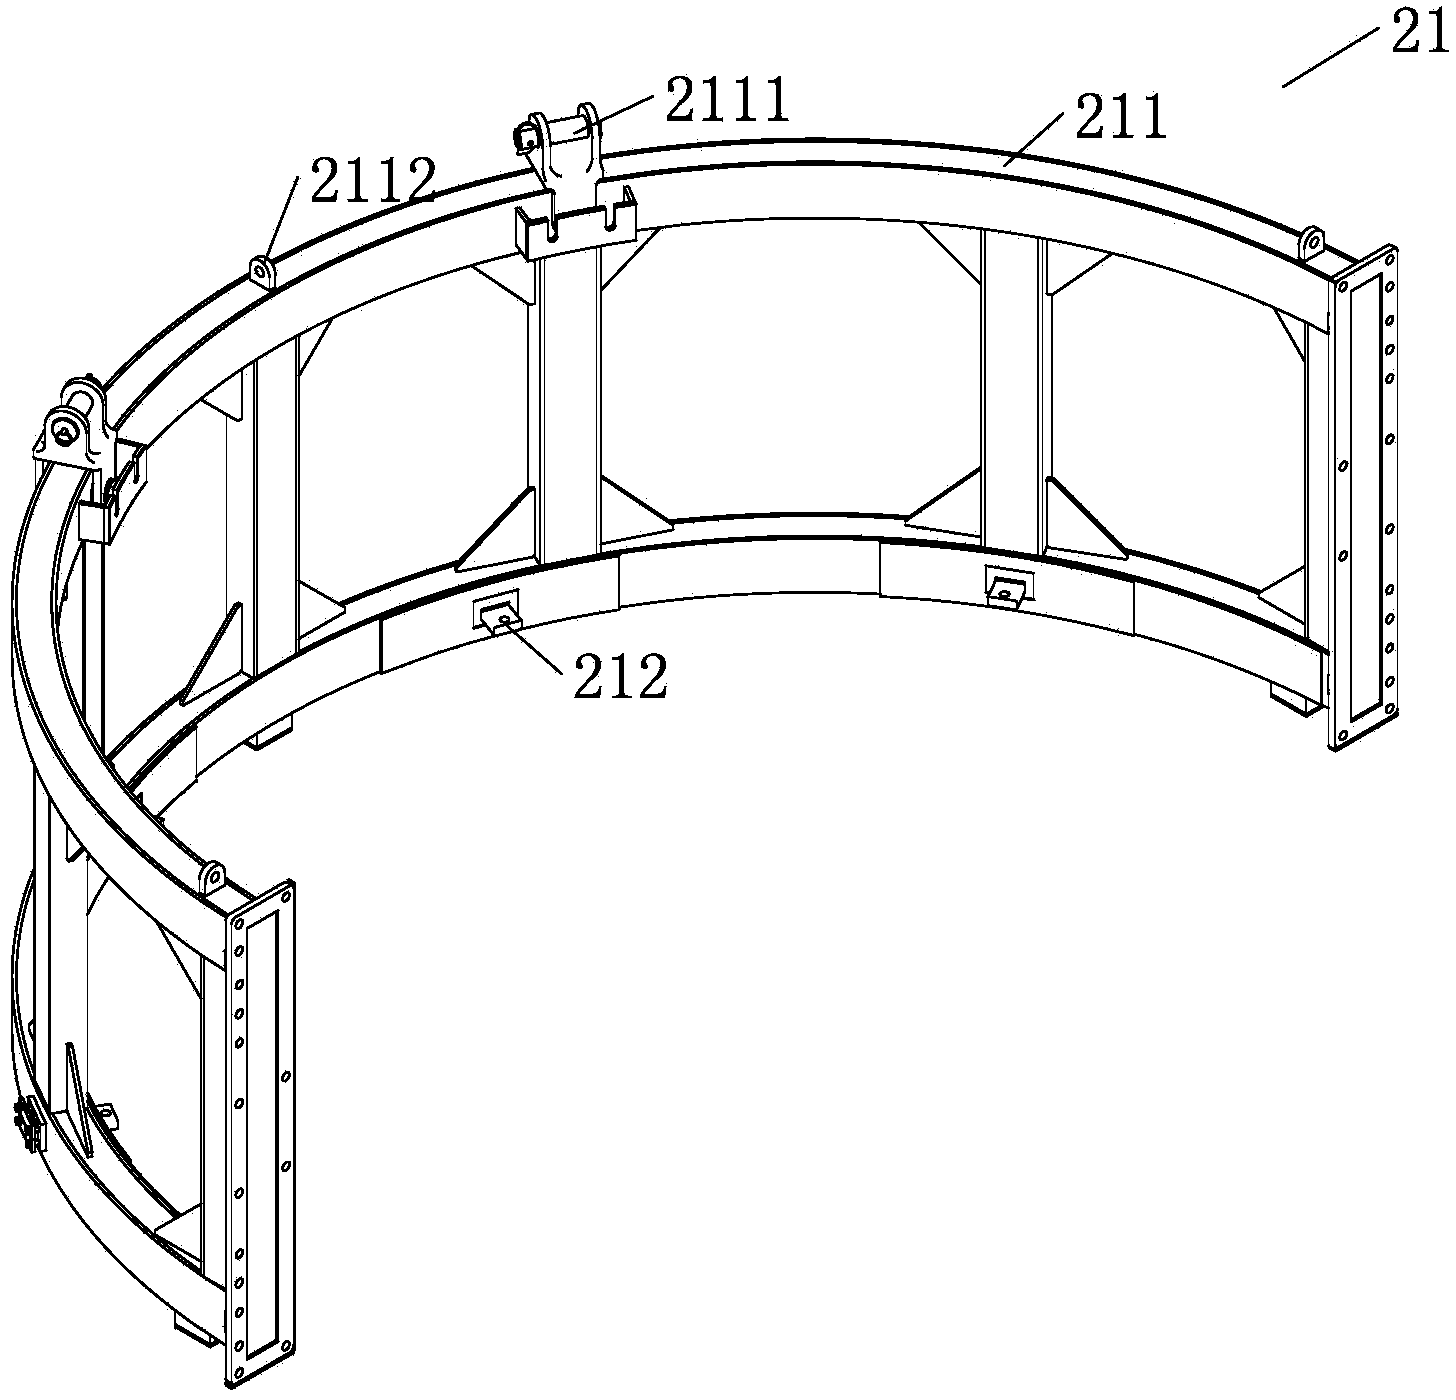 Cable-stayed sling type vertical-lifting lifting appliance having large-stiffness frame structure and assembled lifting appliance